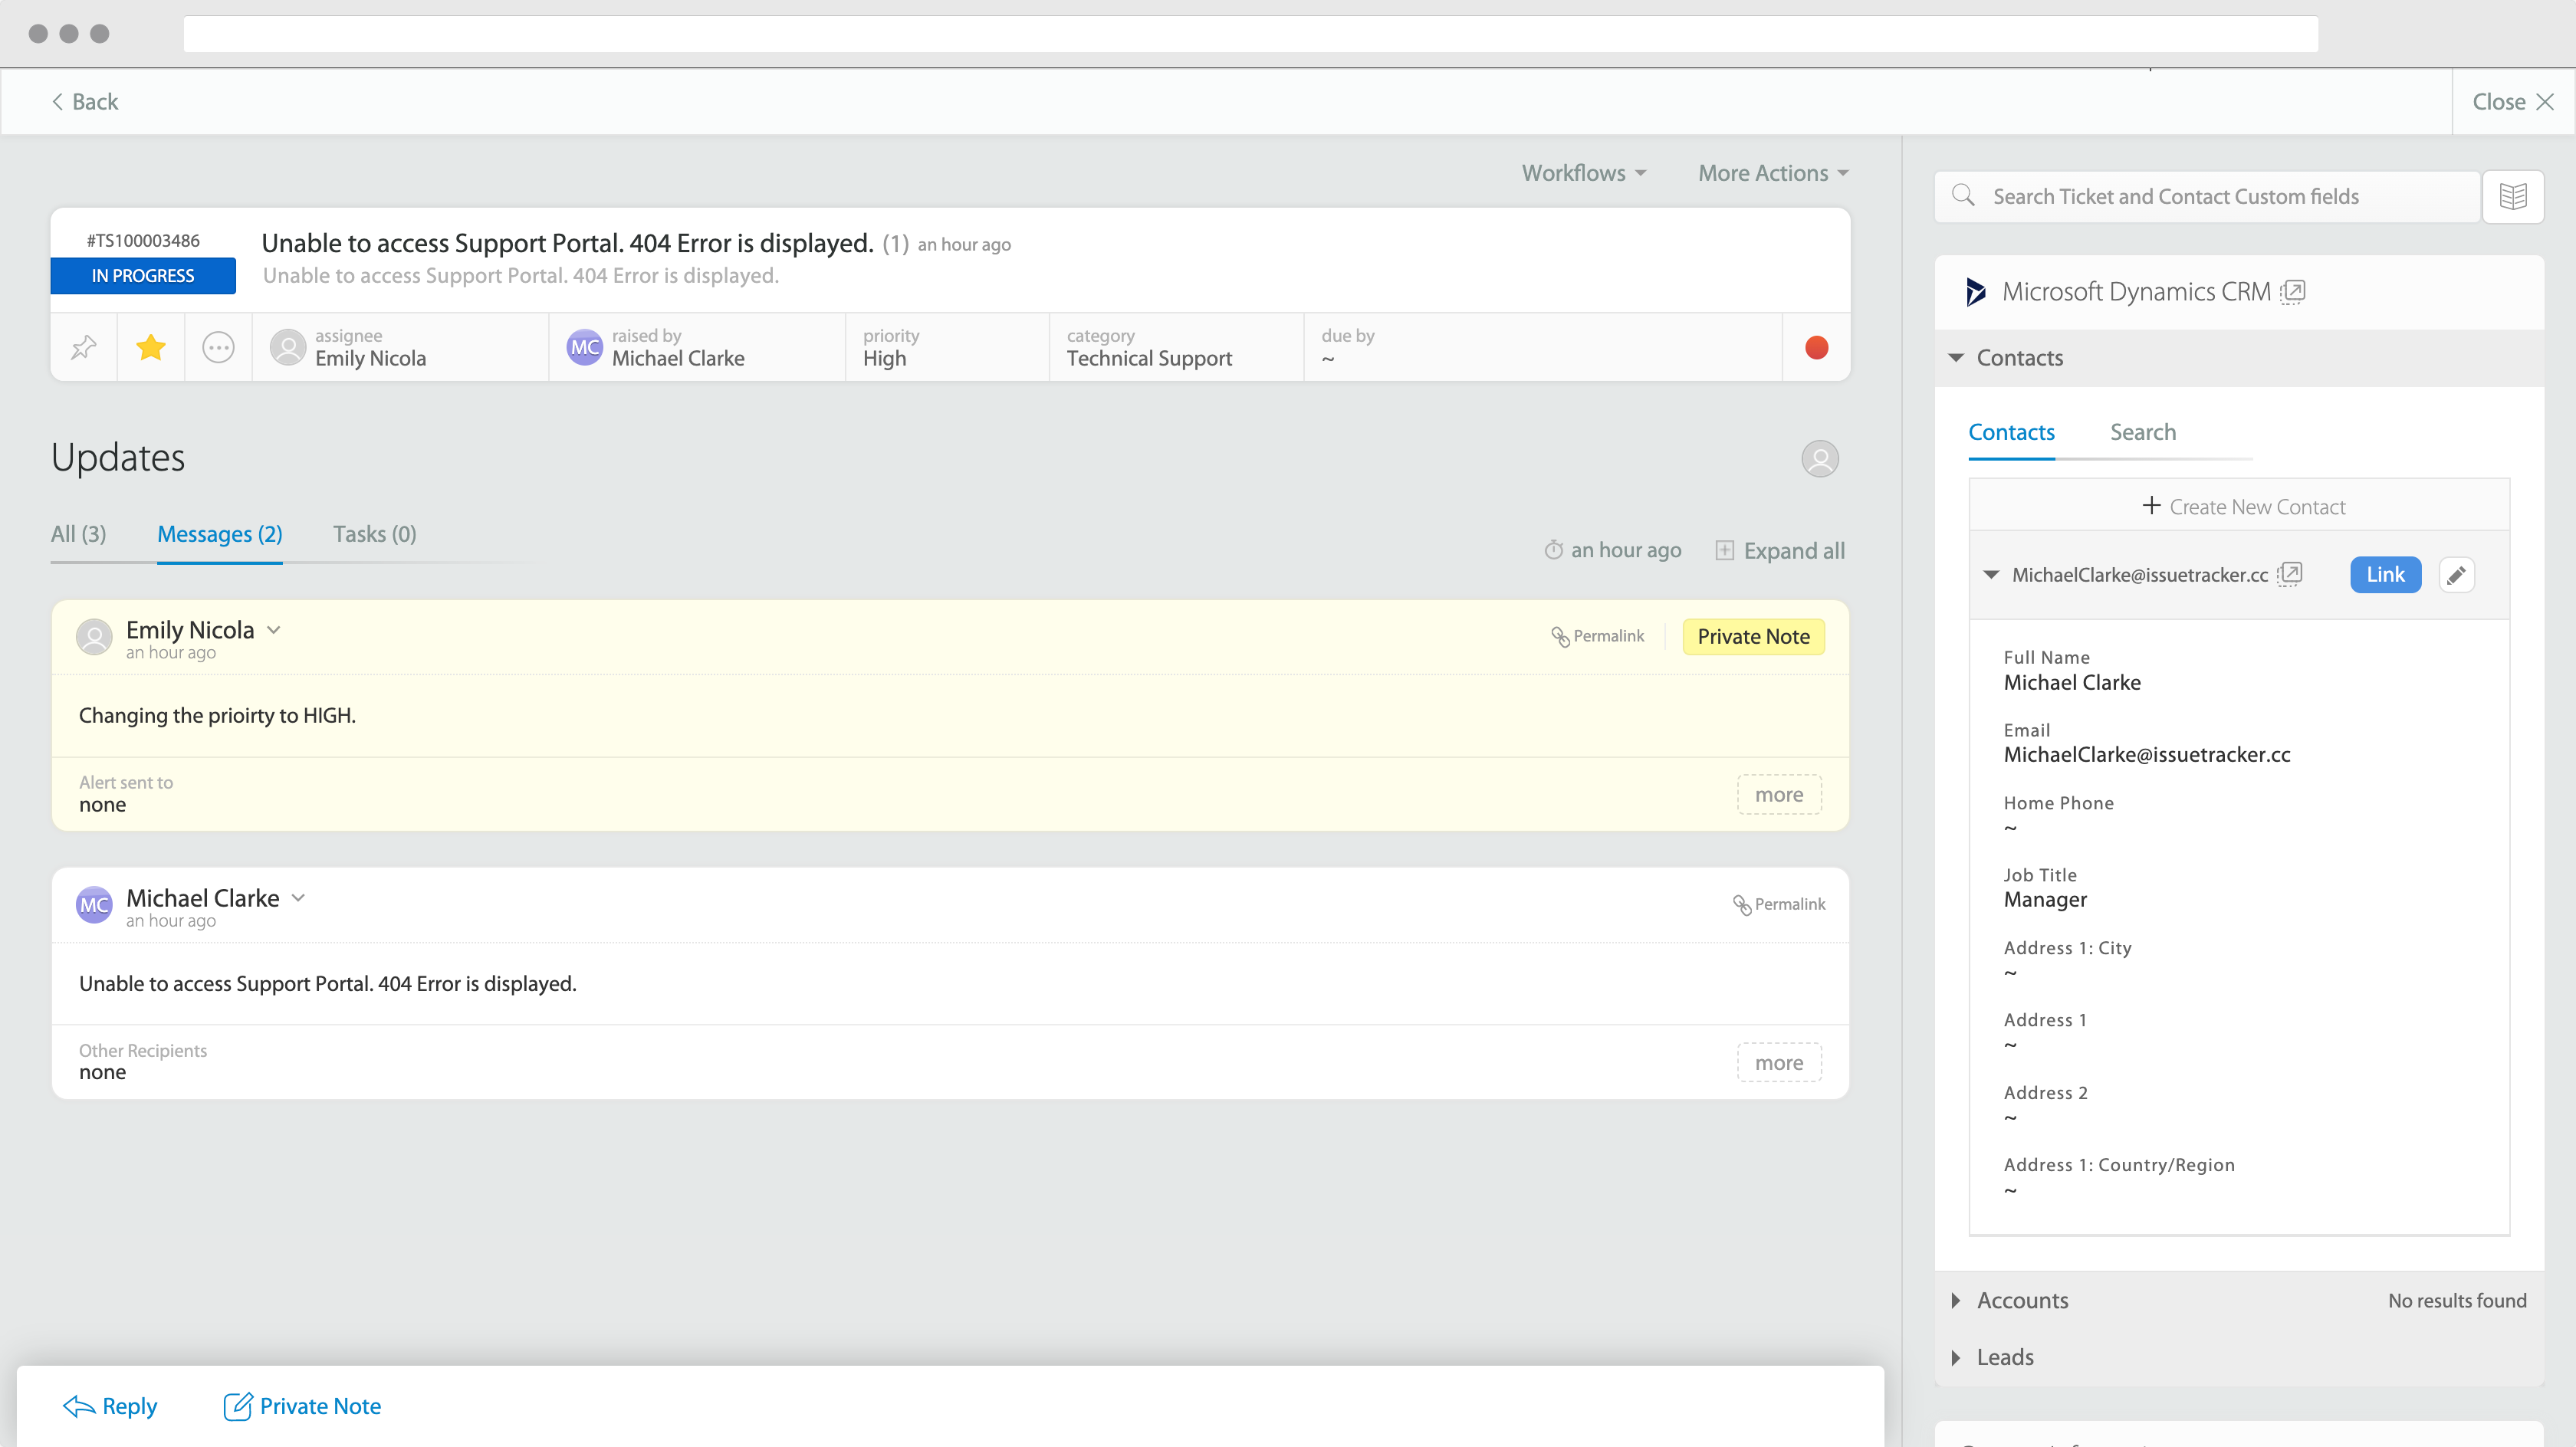 Admins, Agents, and Requesters can securely log into Service Desk using Okta